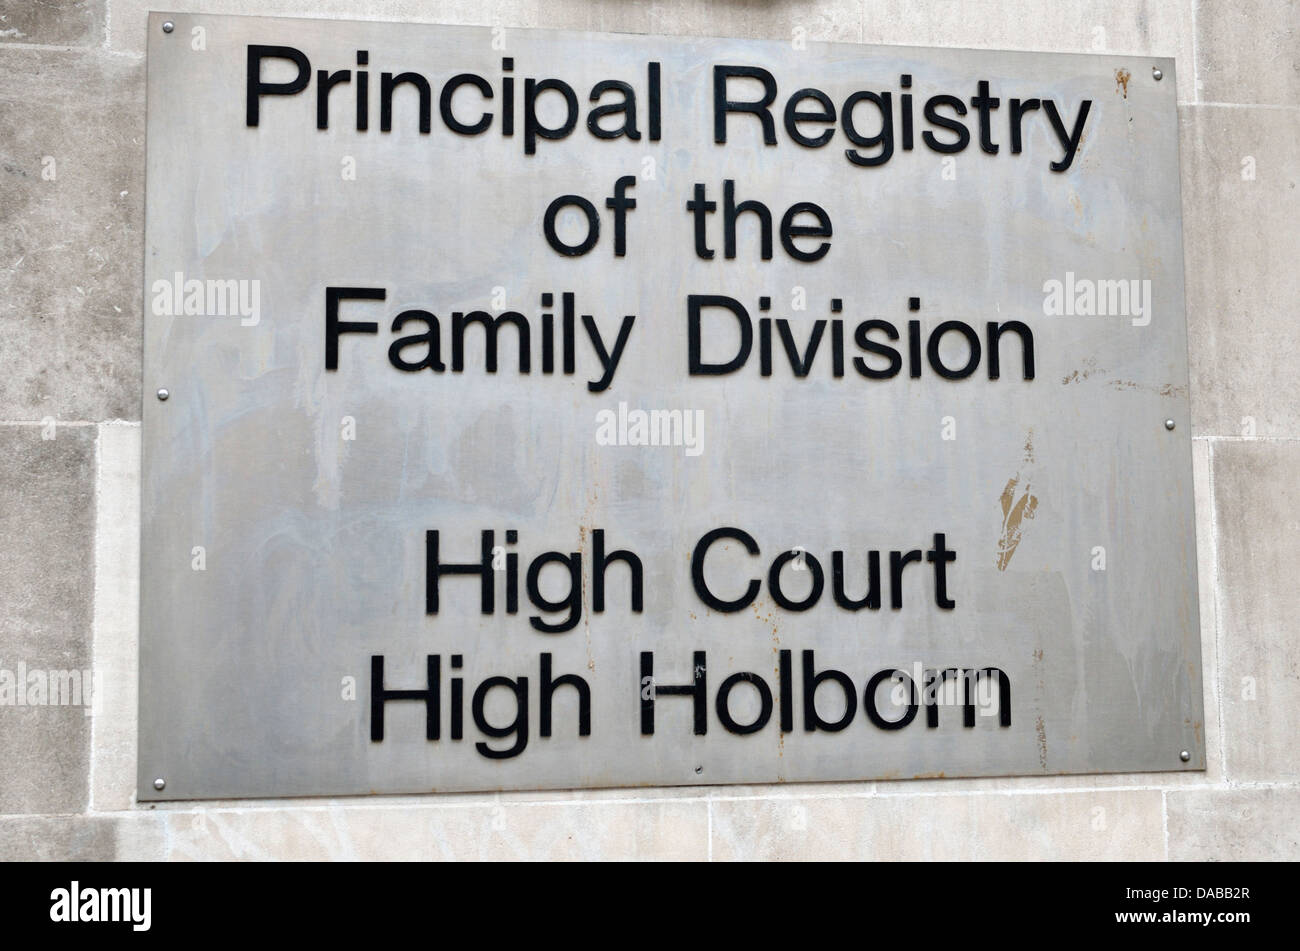 Principal Registry of the Family Division High Holborn Court, Holborn, London, UK. Stock Photo